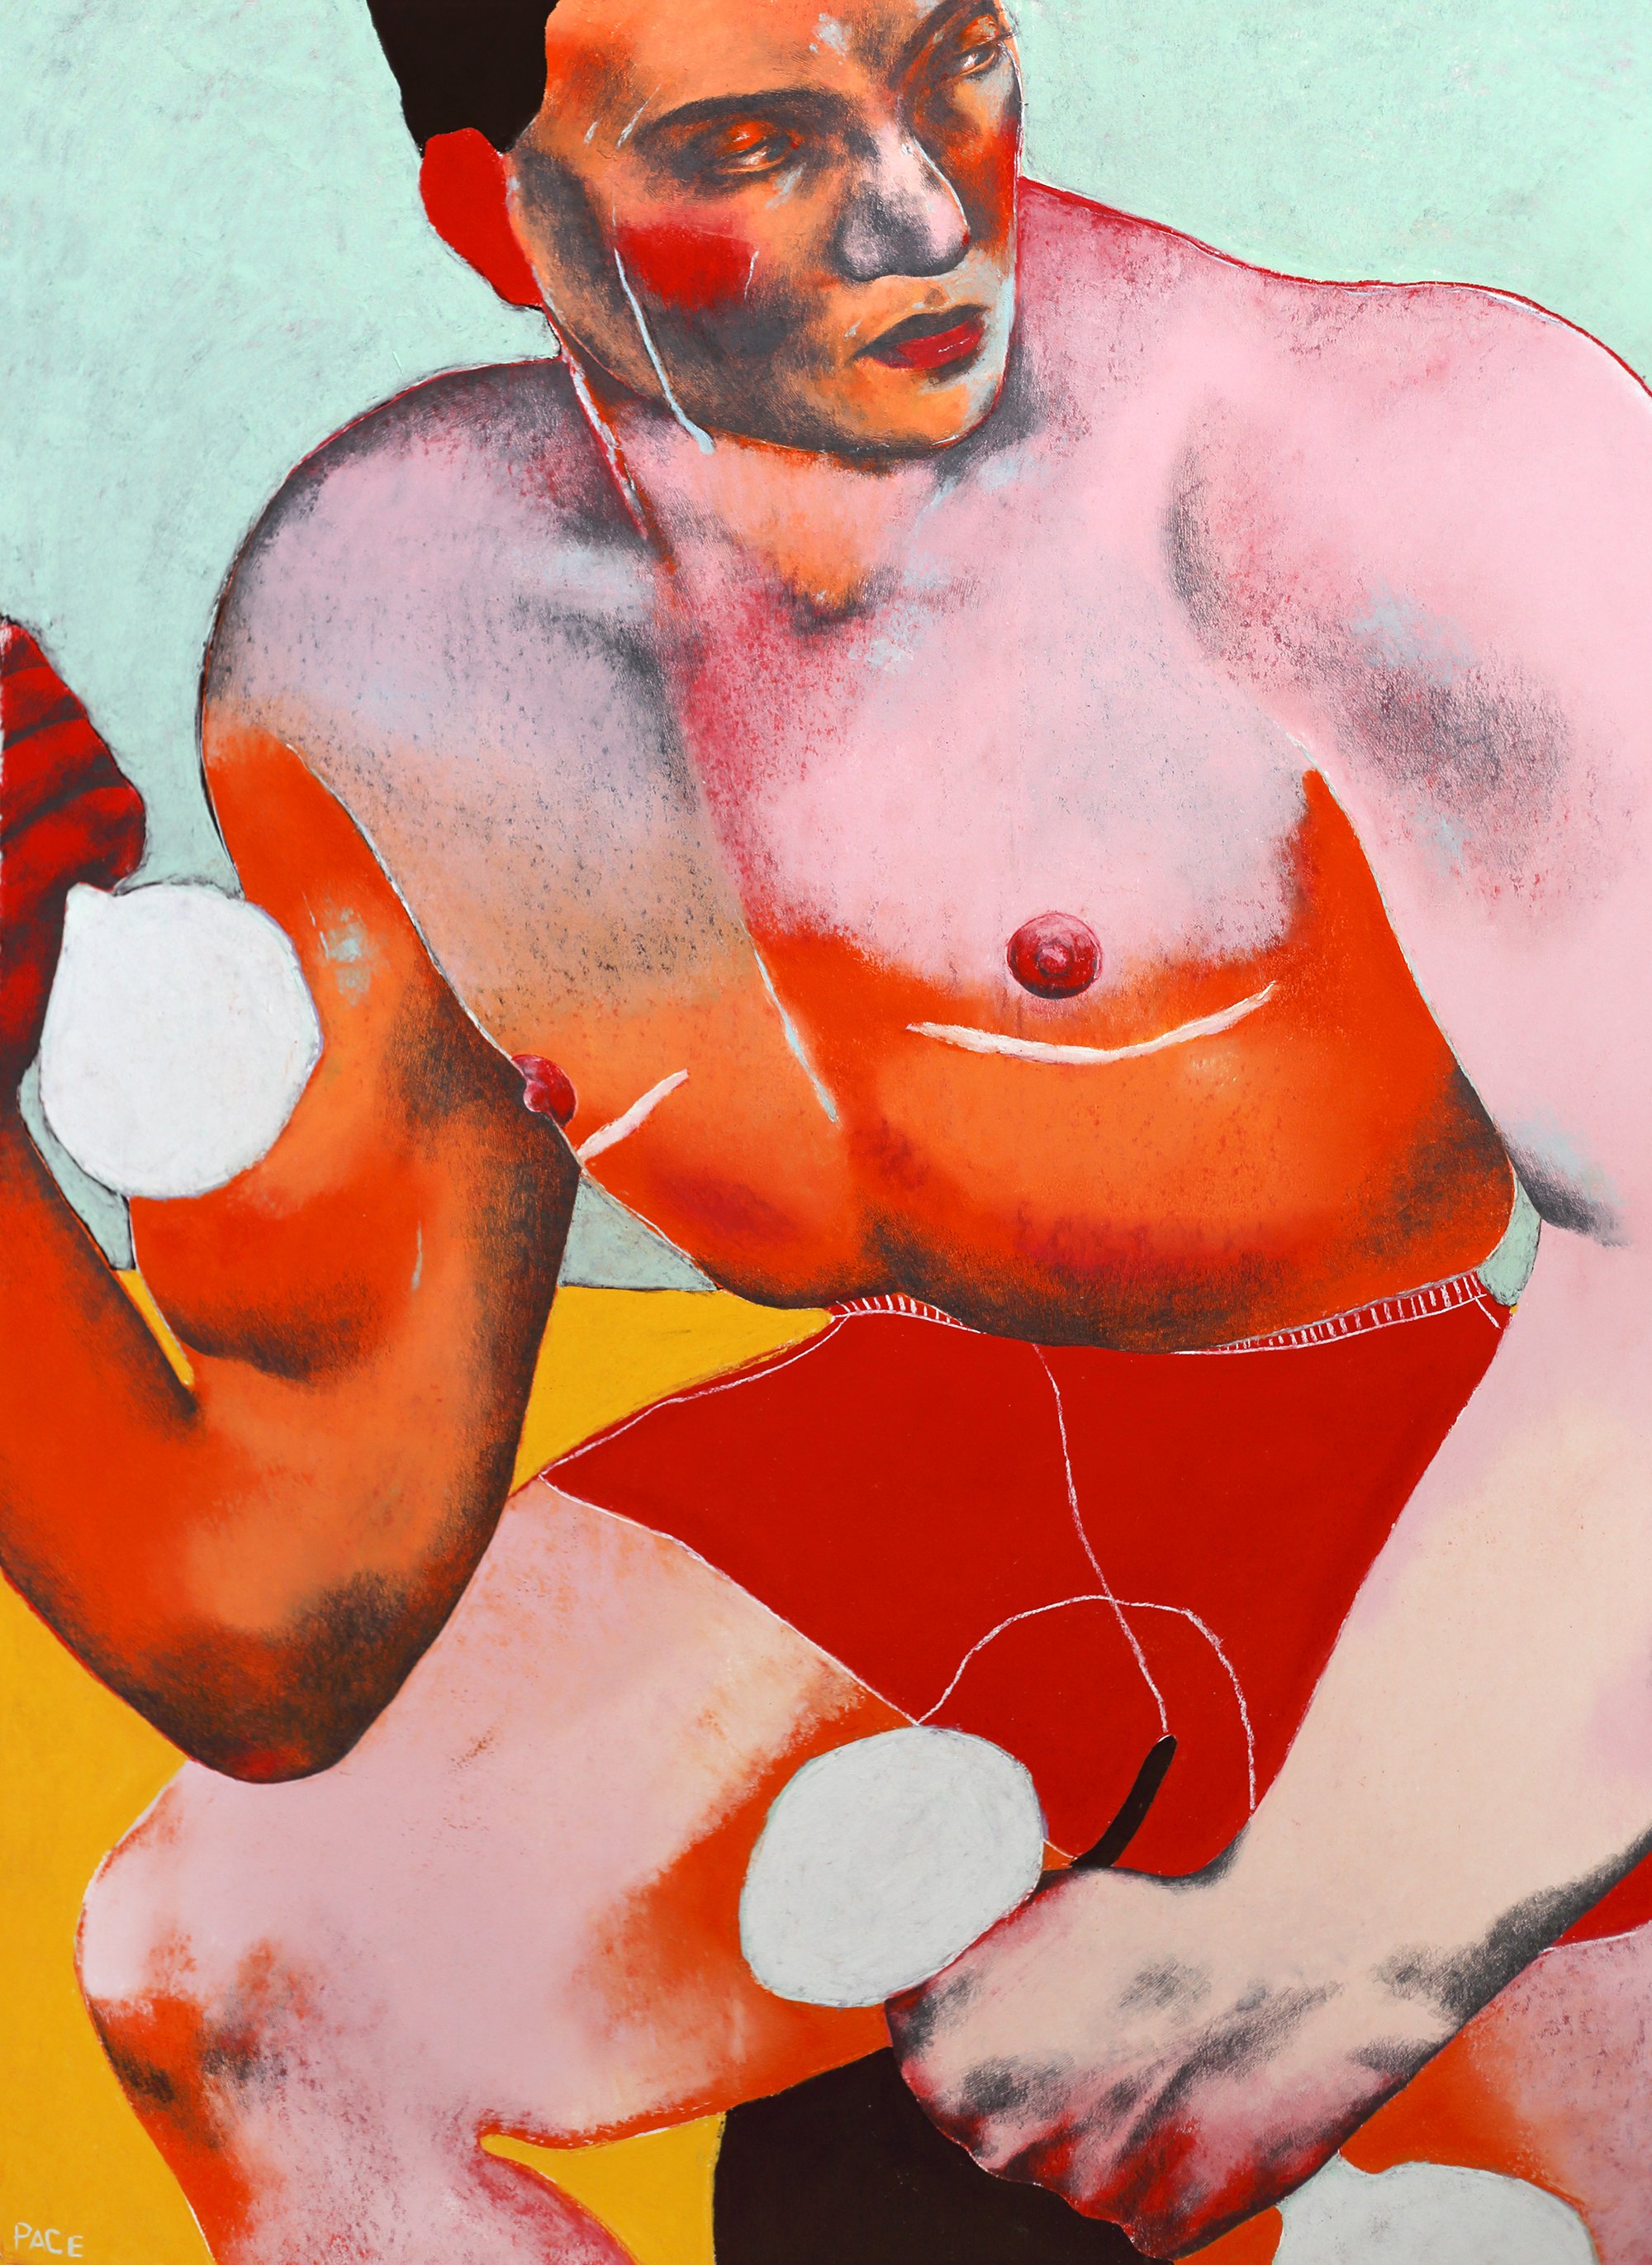   The Body Builder   30x22”, soft pastel and pencil on paper, 2021 